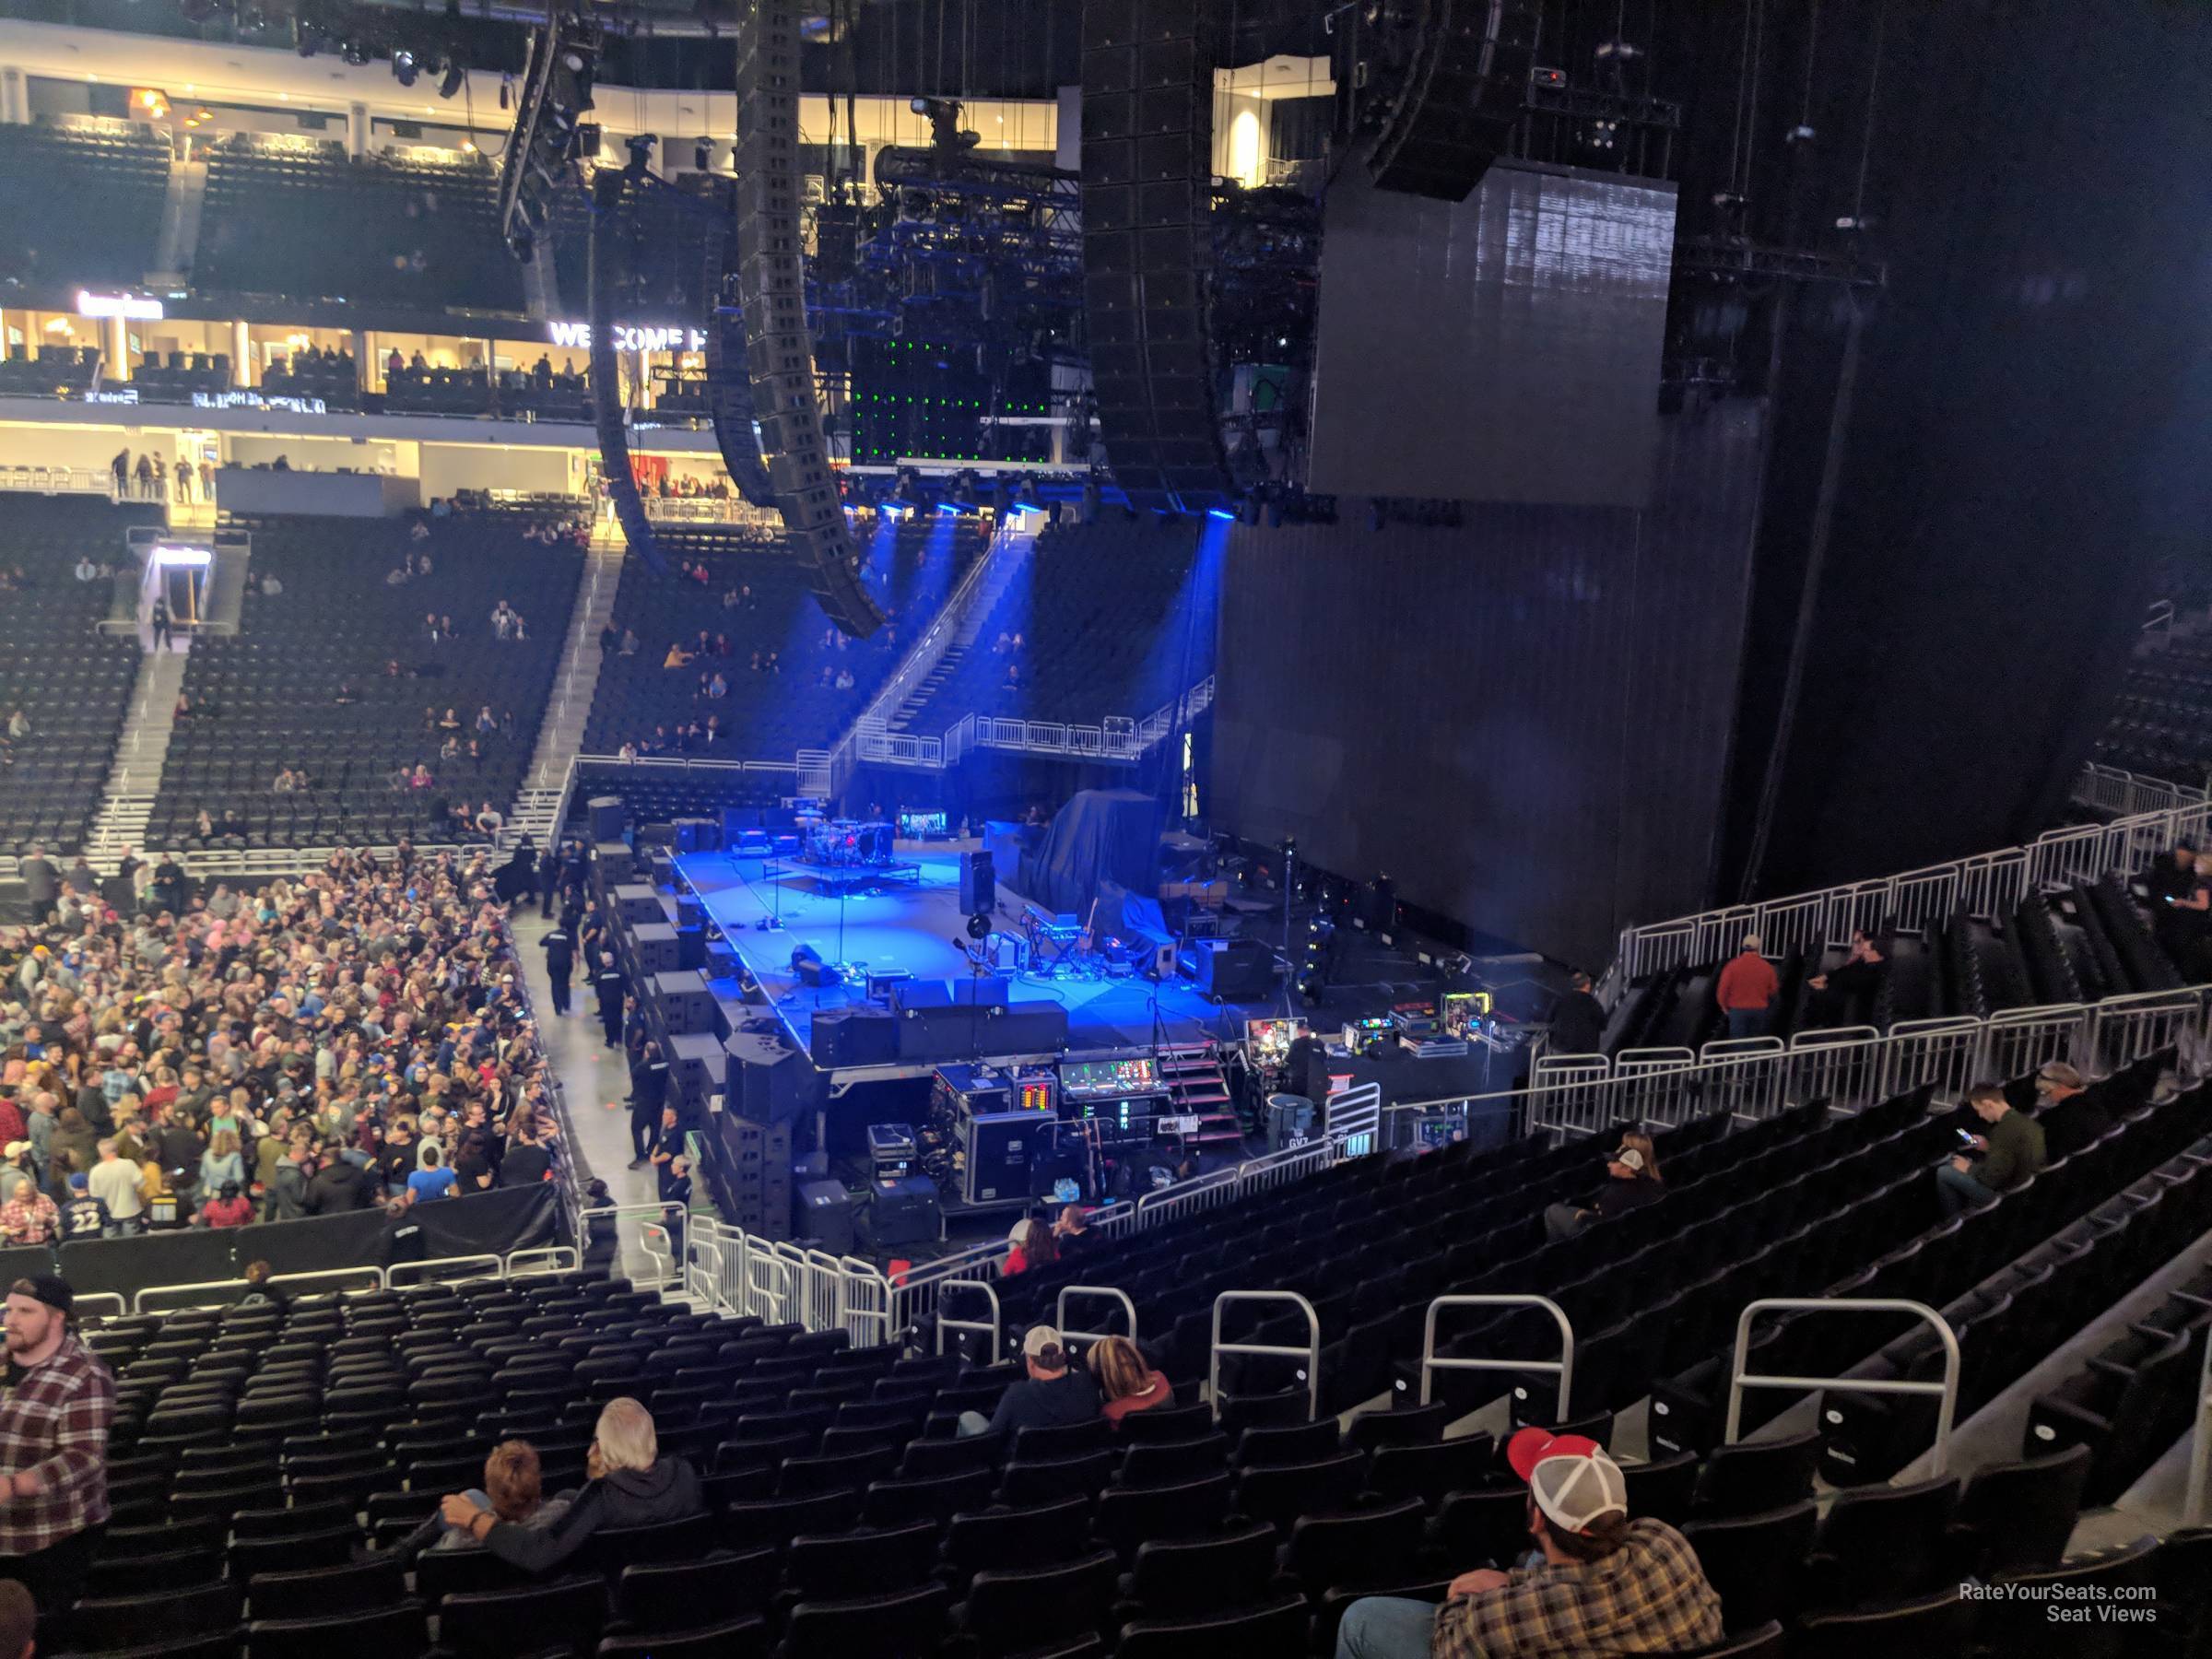 Fiserv Forum Seating Chart View